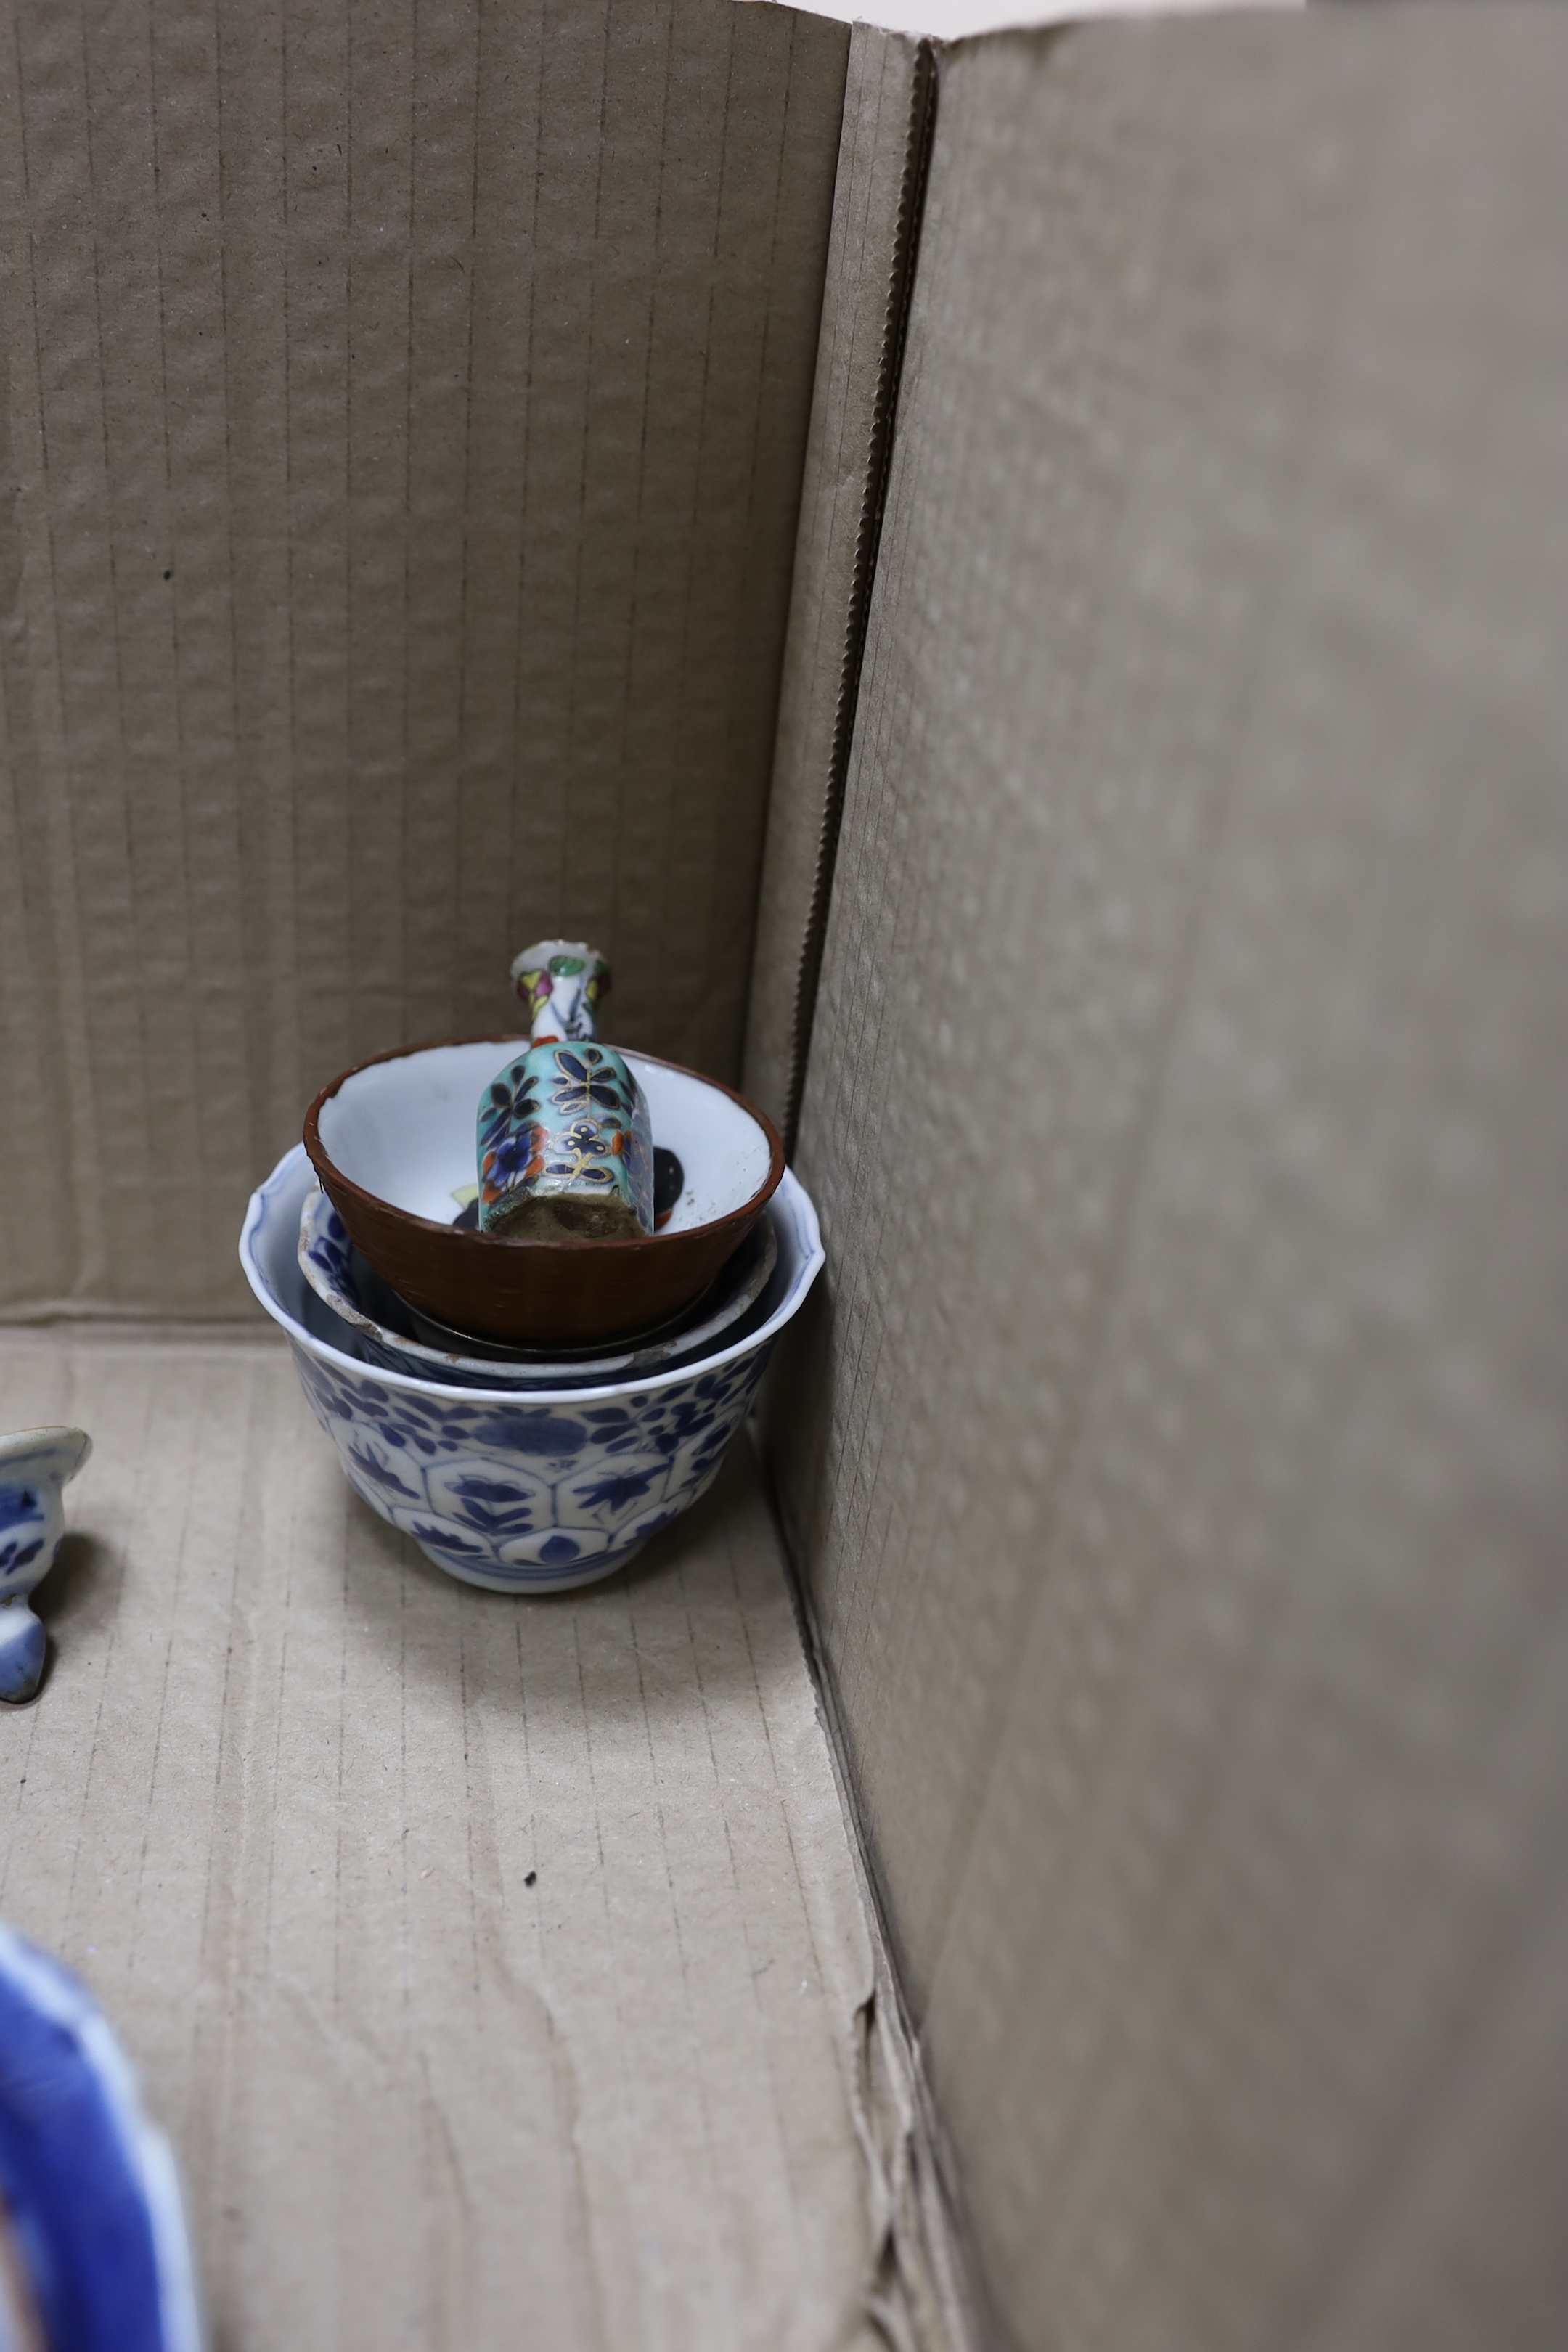 A group of Chinese blue and white vases, box and tea wares, Kangxi to 19th century and other ceramics